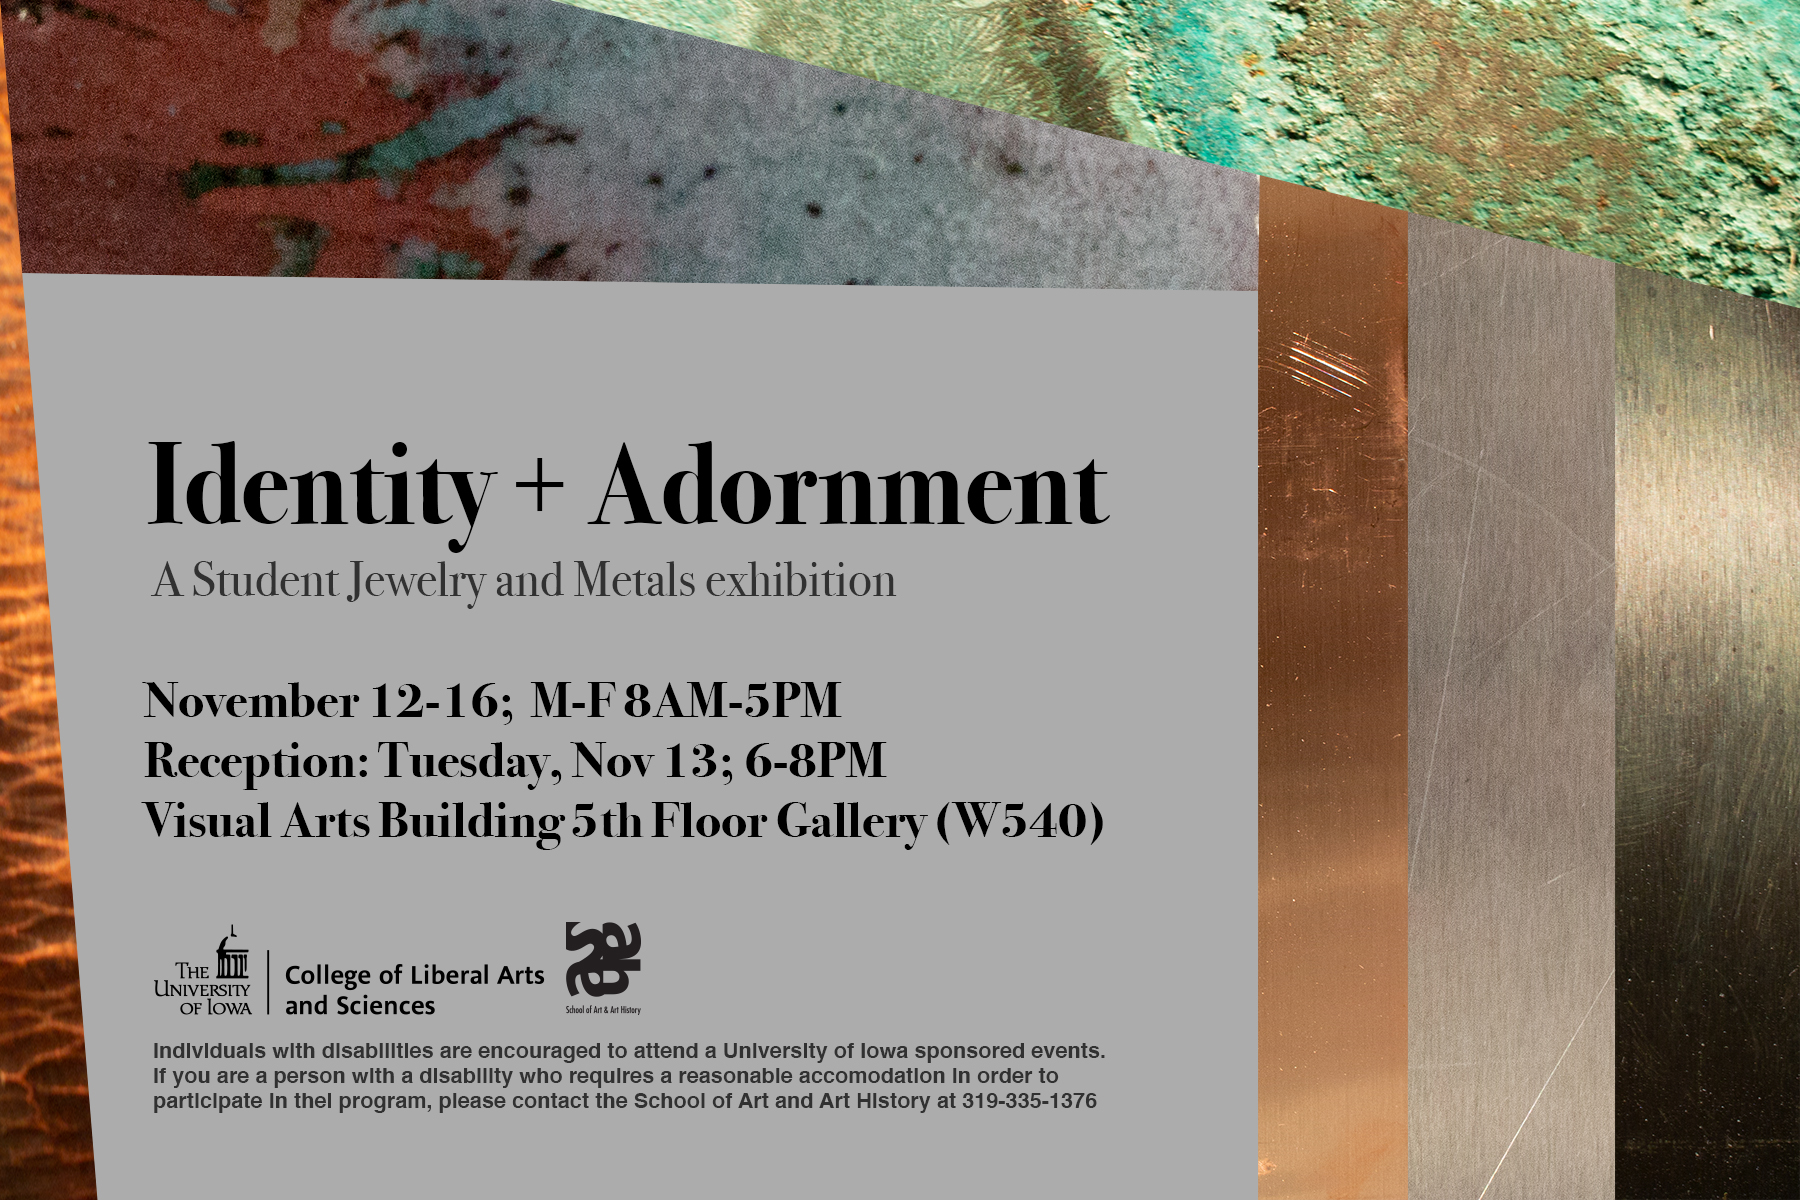 Identity + Adornment A Student Jewelry and Metals exhibition November 12-16 m-f 8 am - 5 pm Reception Tuesday November 13 6-8PM Visual Arts Building 5th Floor Gallery (W540)